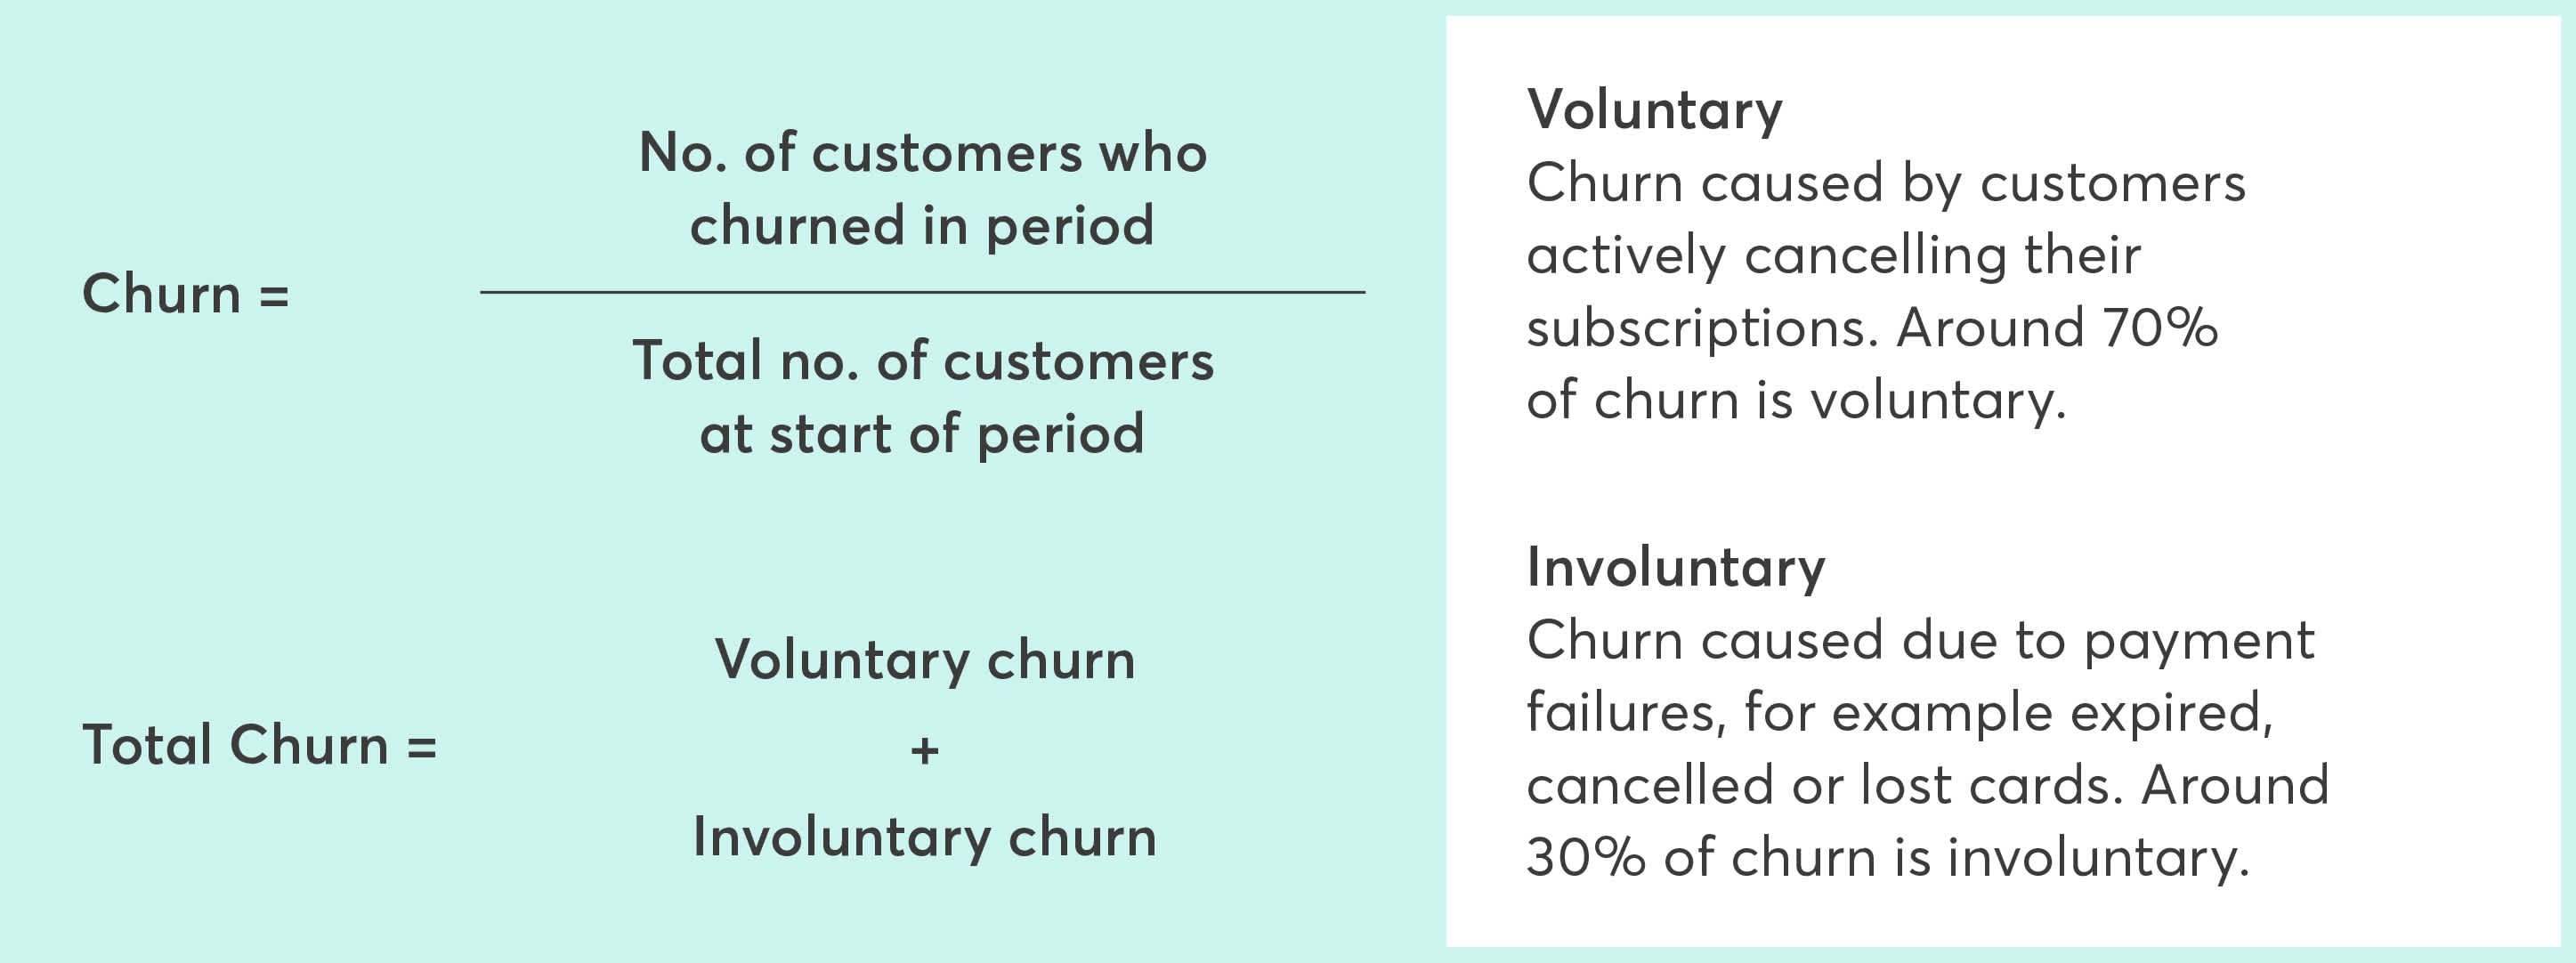 guides > images > intro-to-churn > churn-definition